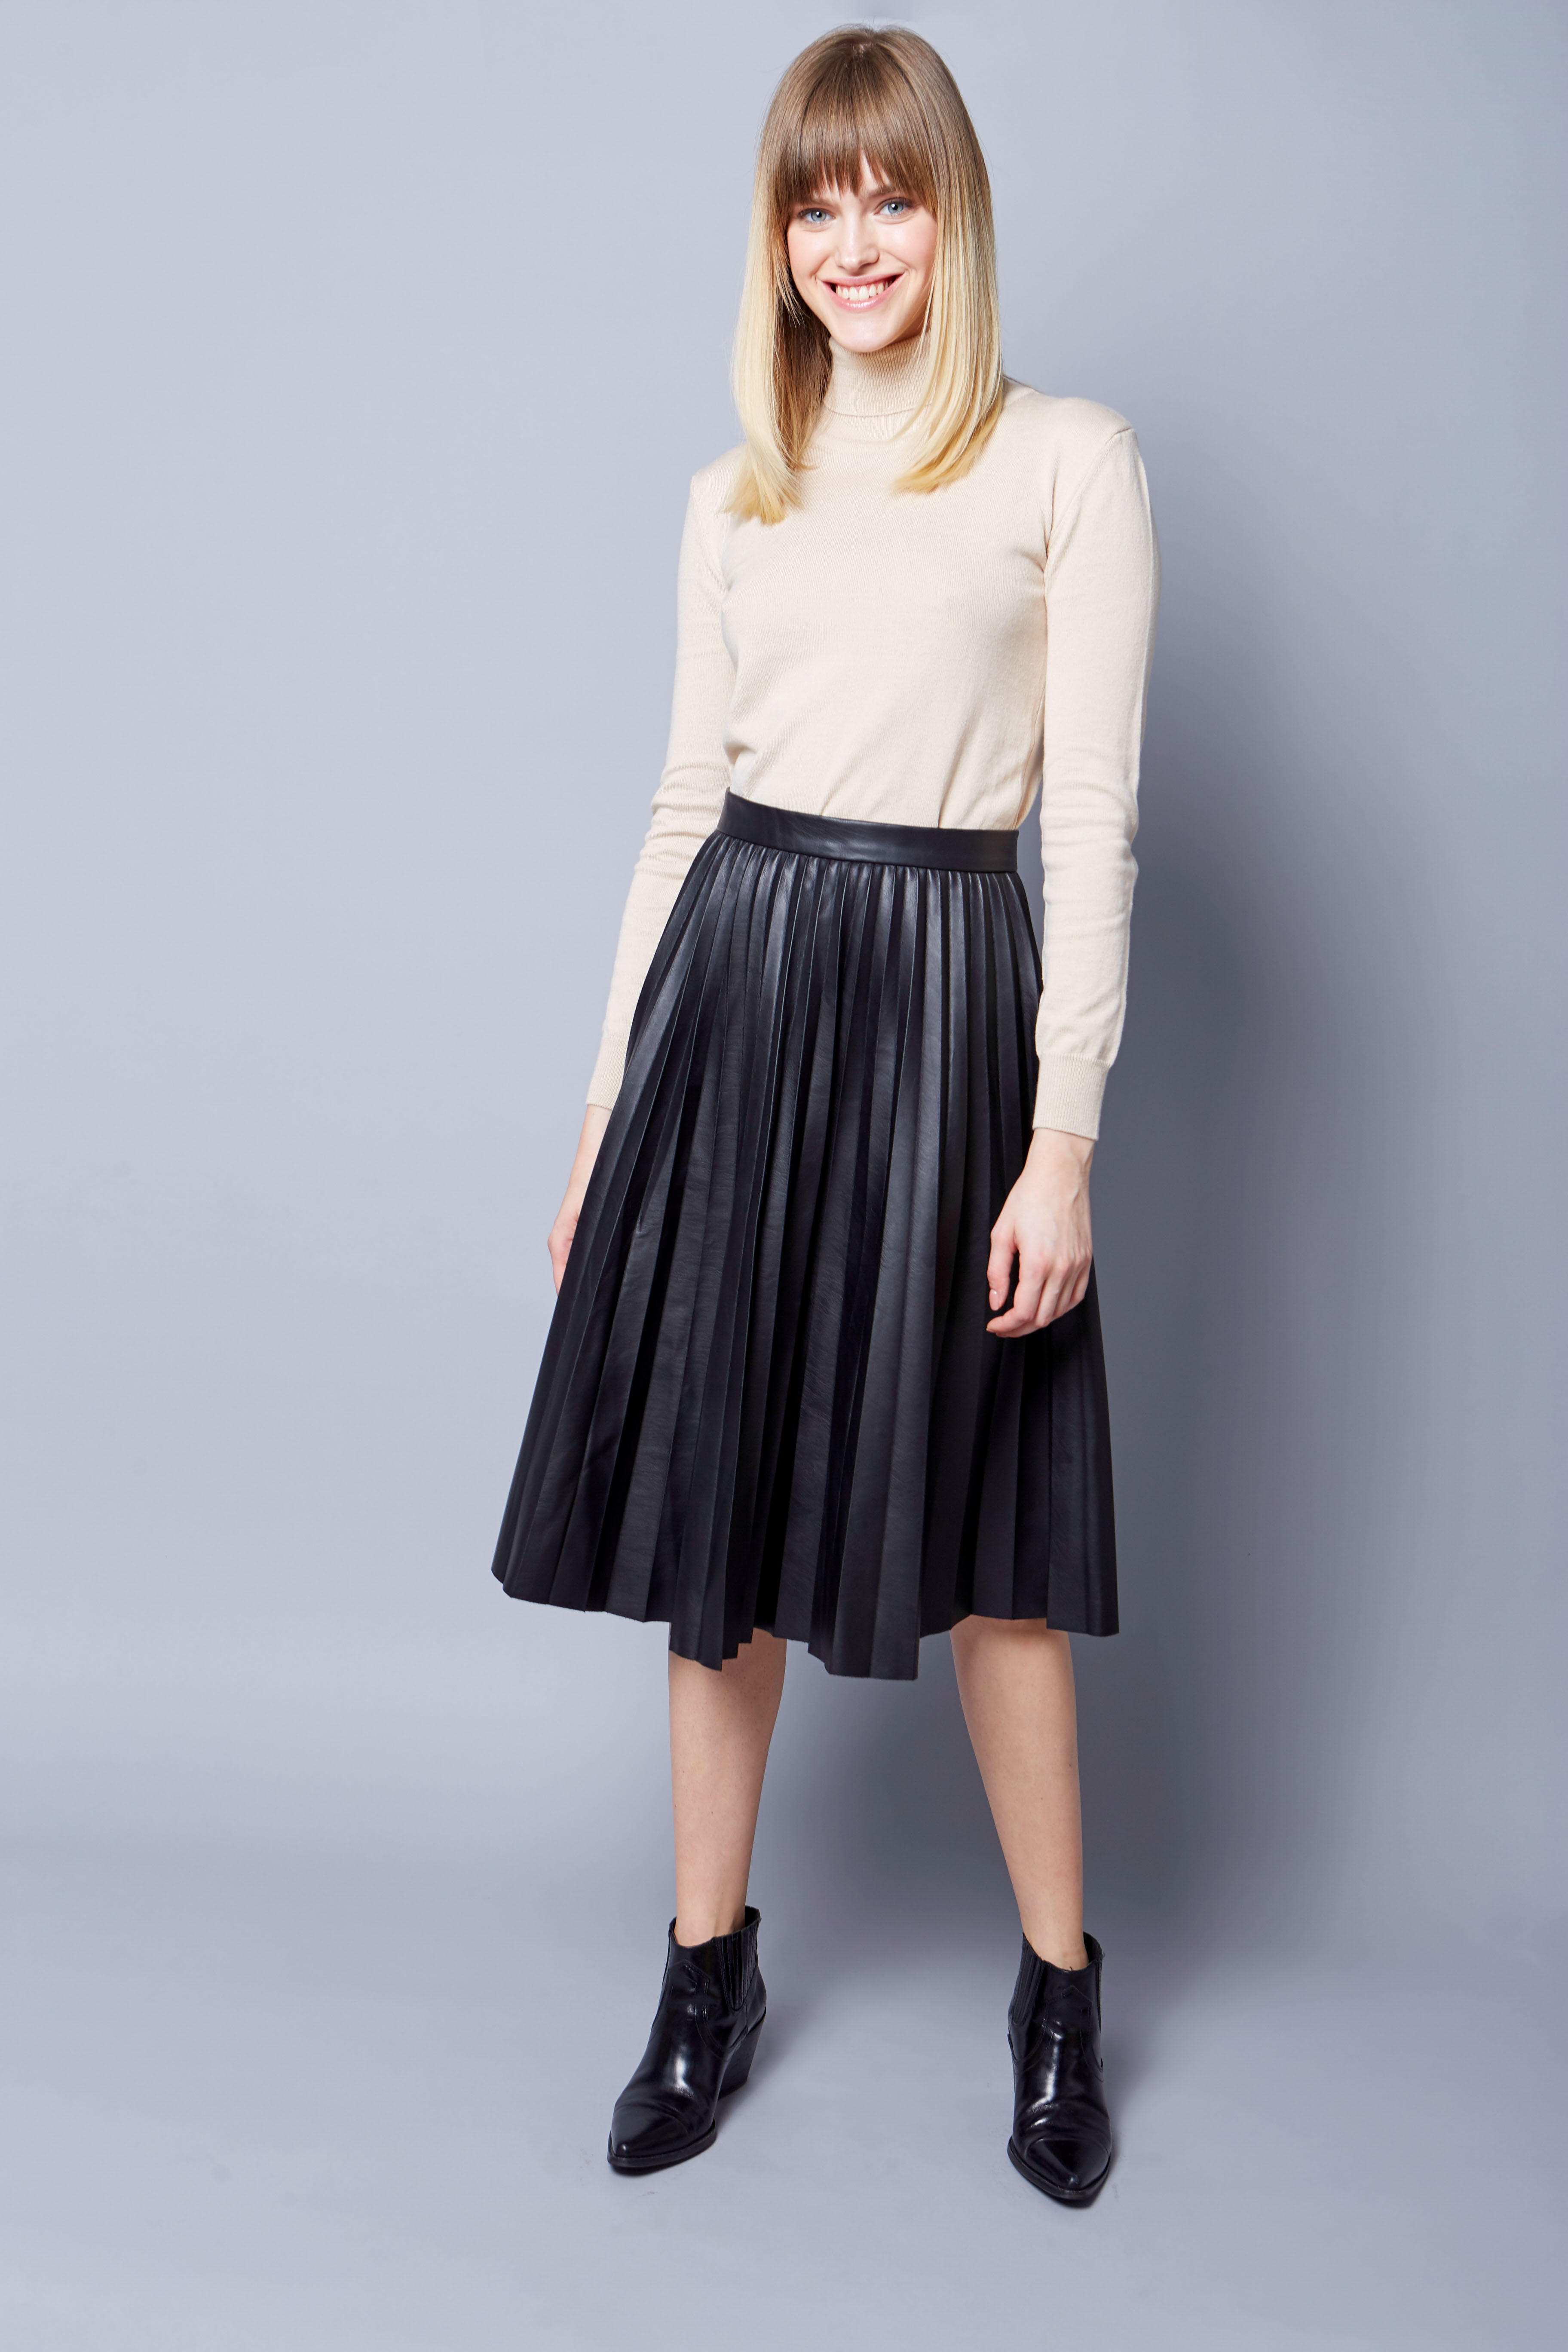 Below the knee pleated black eco-leather skirt, photo 1